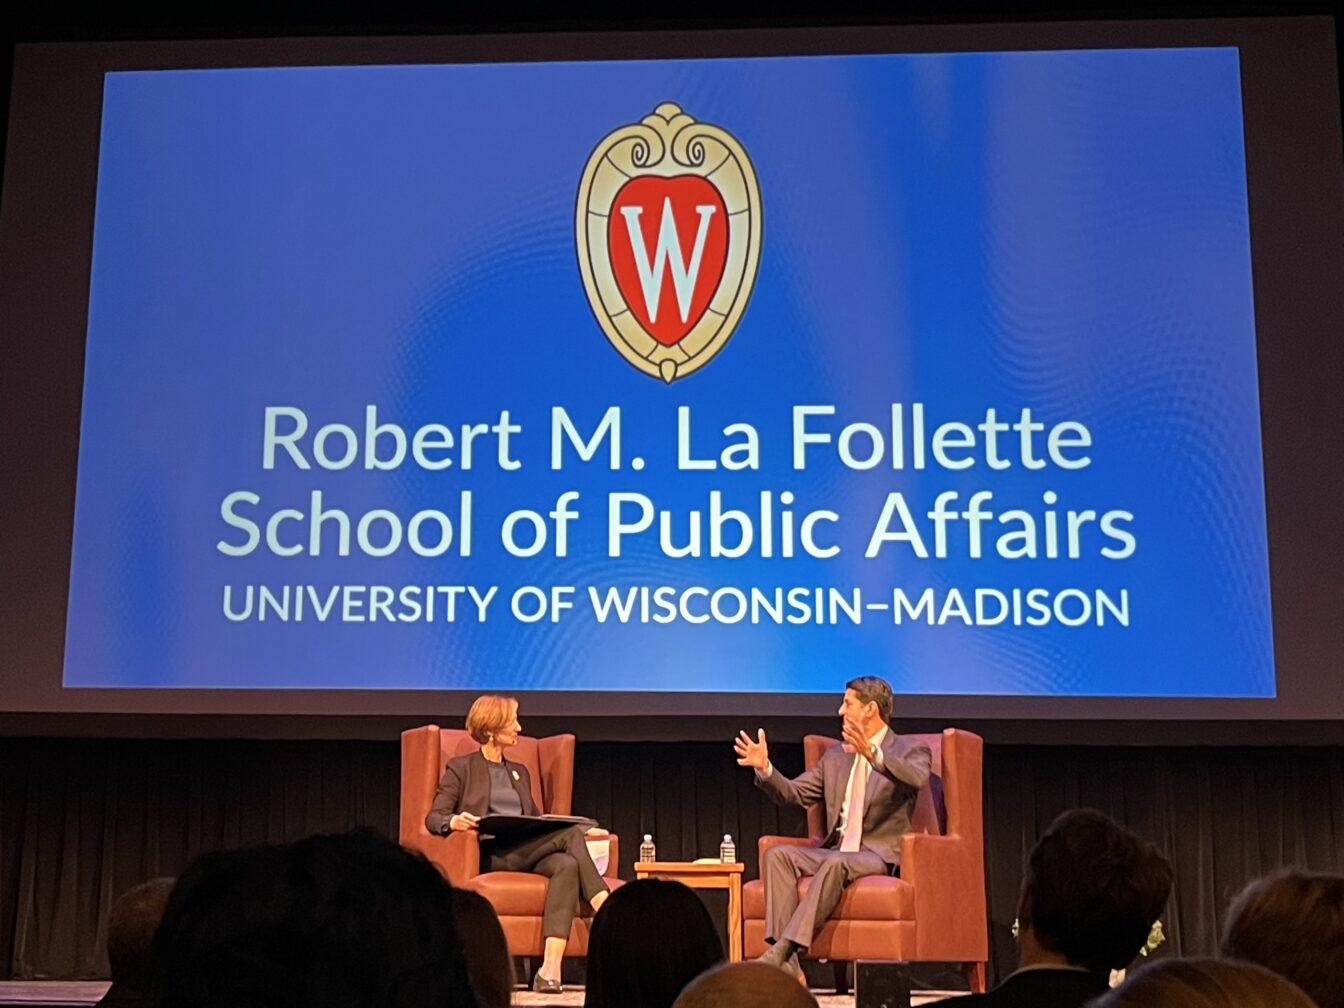 Former Speaker Paul Ryan visits UW to discuss public policy